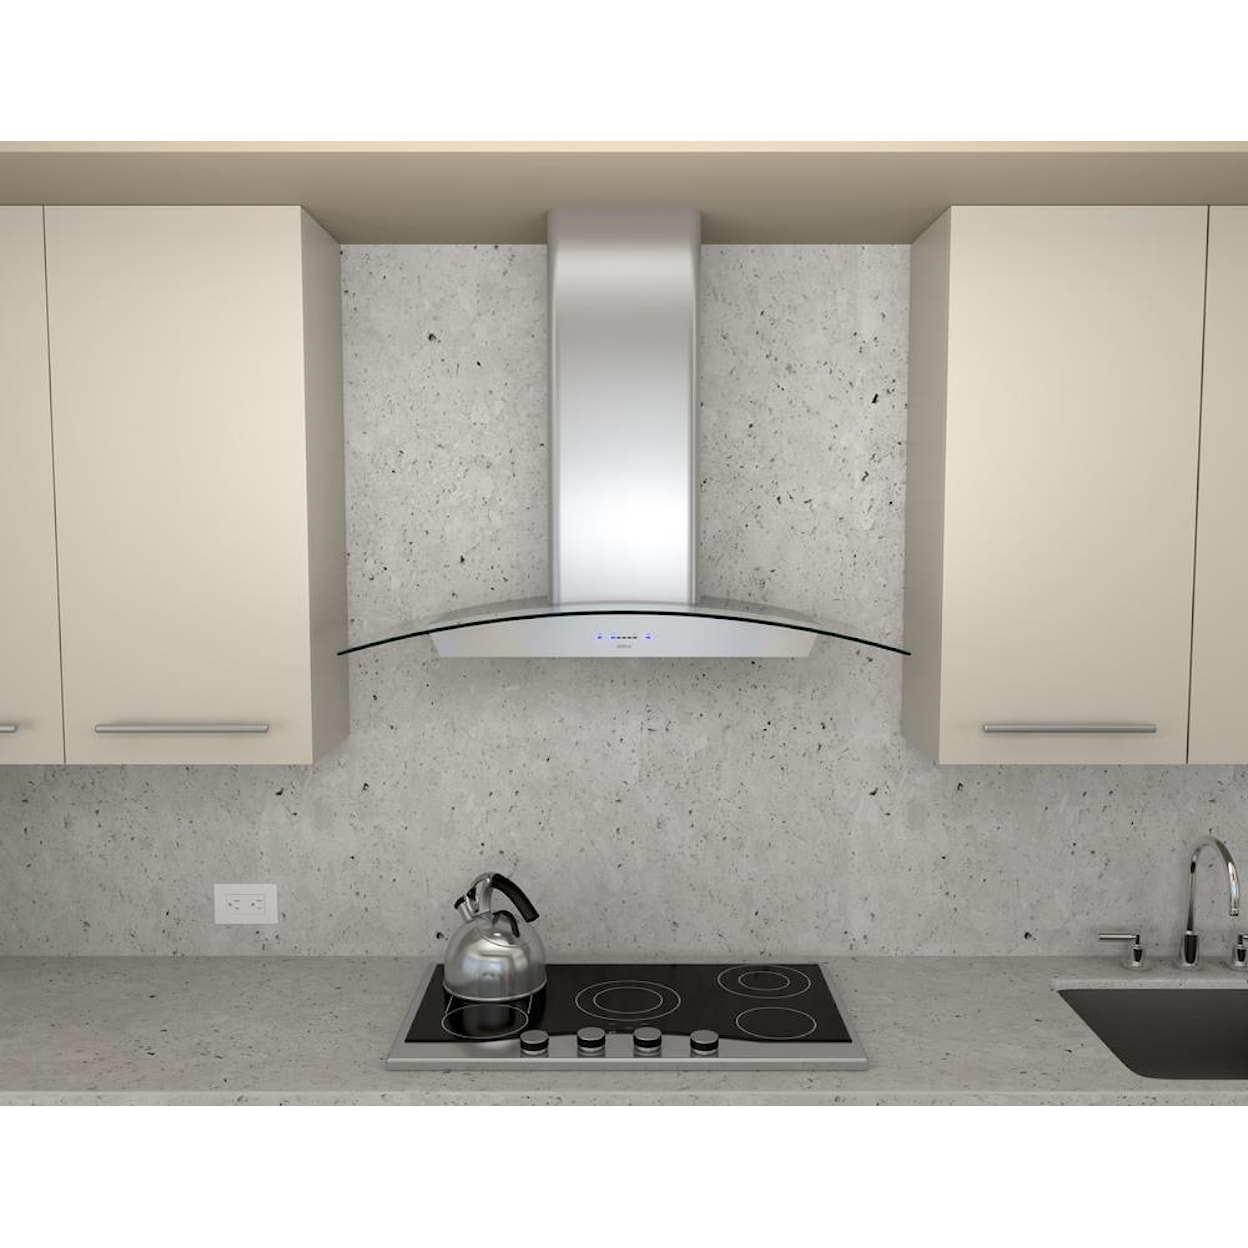 Zephyr Essentials Collection- Chimney Wall and Downdraft 30" Wall Mount Chimney Pro Range Hood